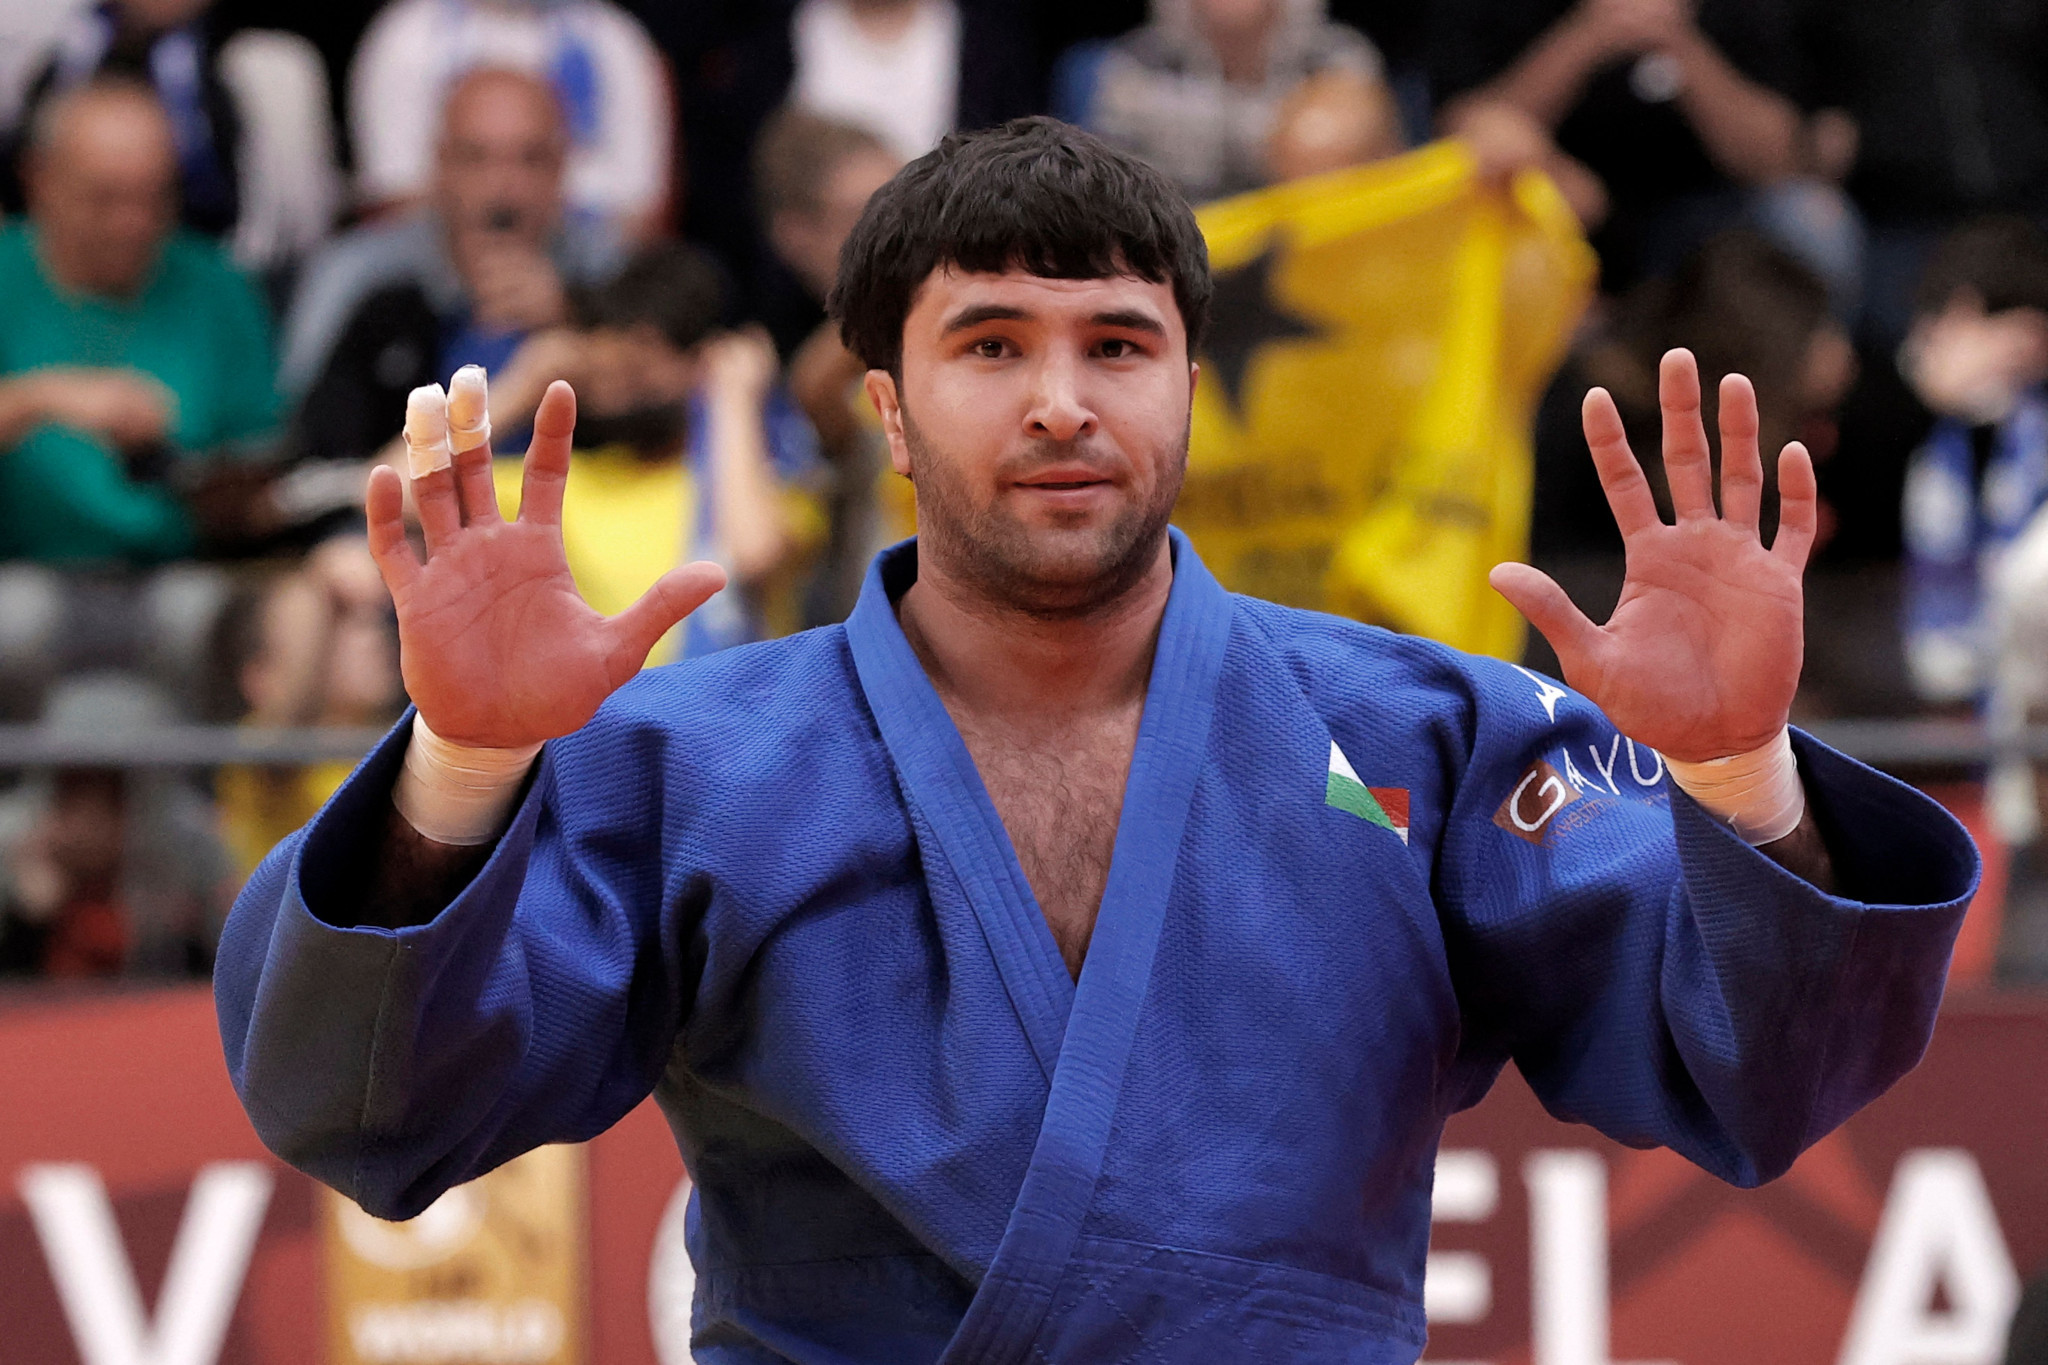 World number one Temur Rakhimov will carry home hopes in Dushanbe ©Getty Images